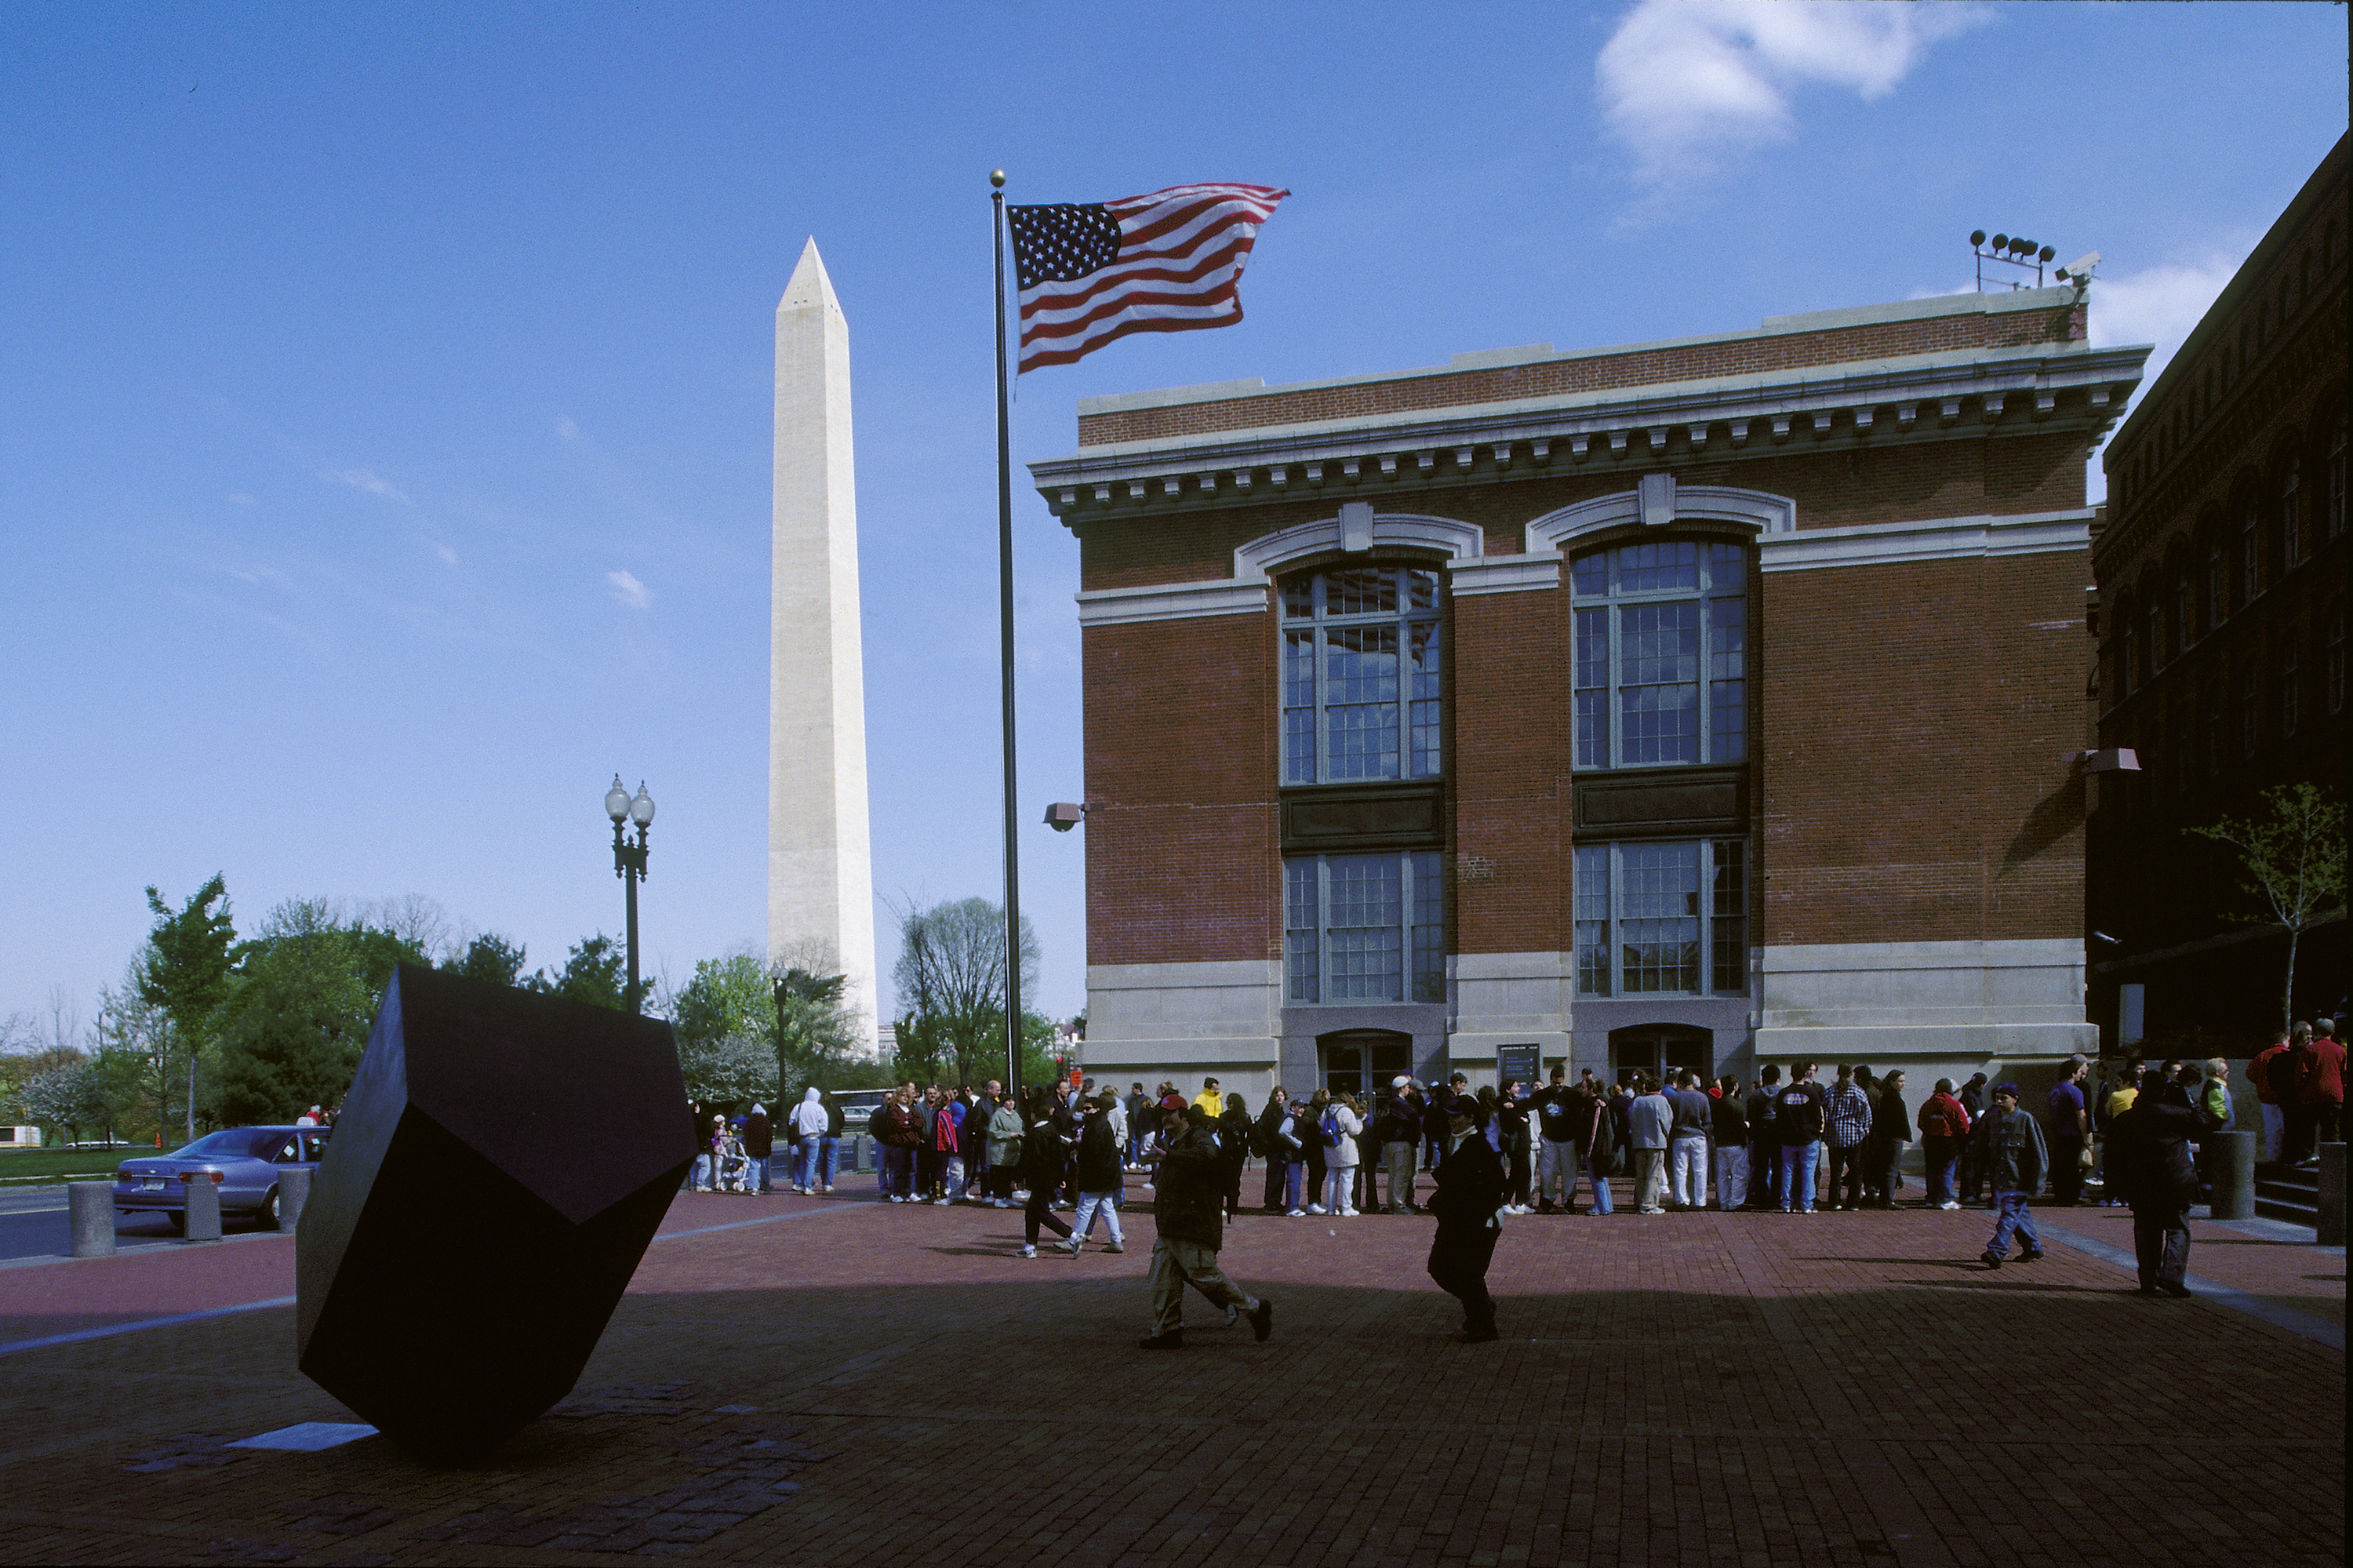 Visitors wait in line on the Eisenhower Plaza to enter the U.S. Holocaust Memorial Museum.  Behind them is the Washington Monument and the Ross Administration Building.